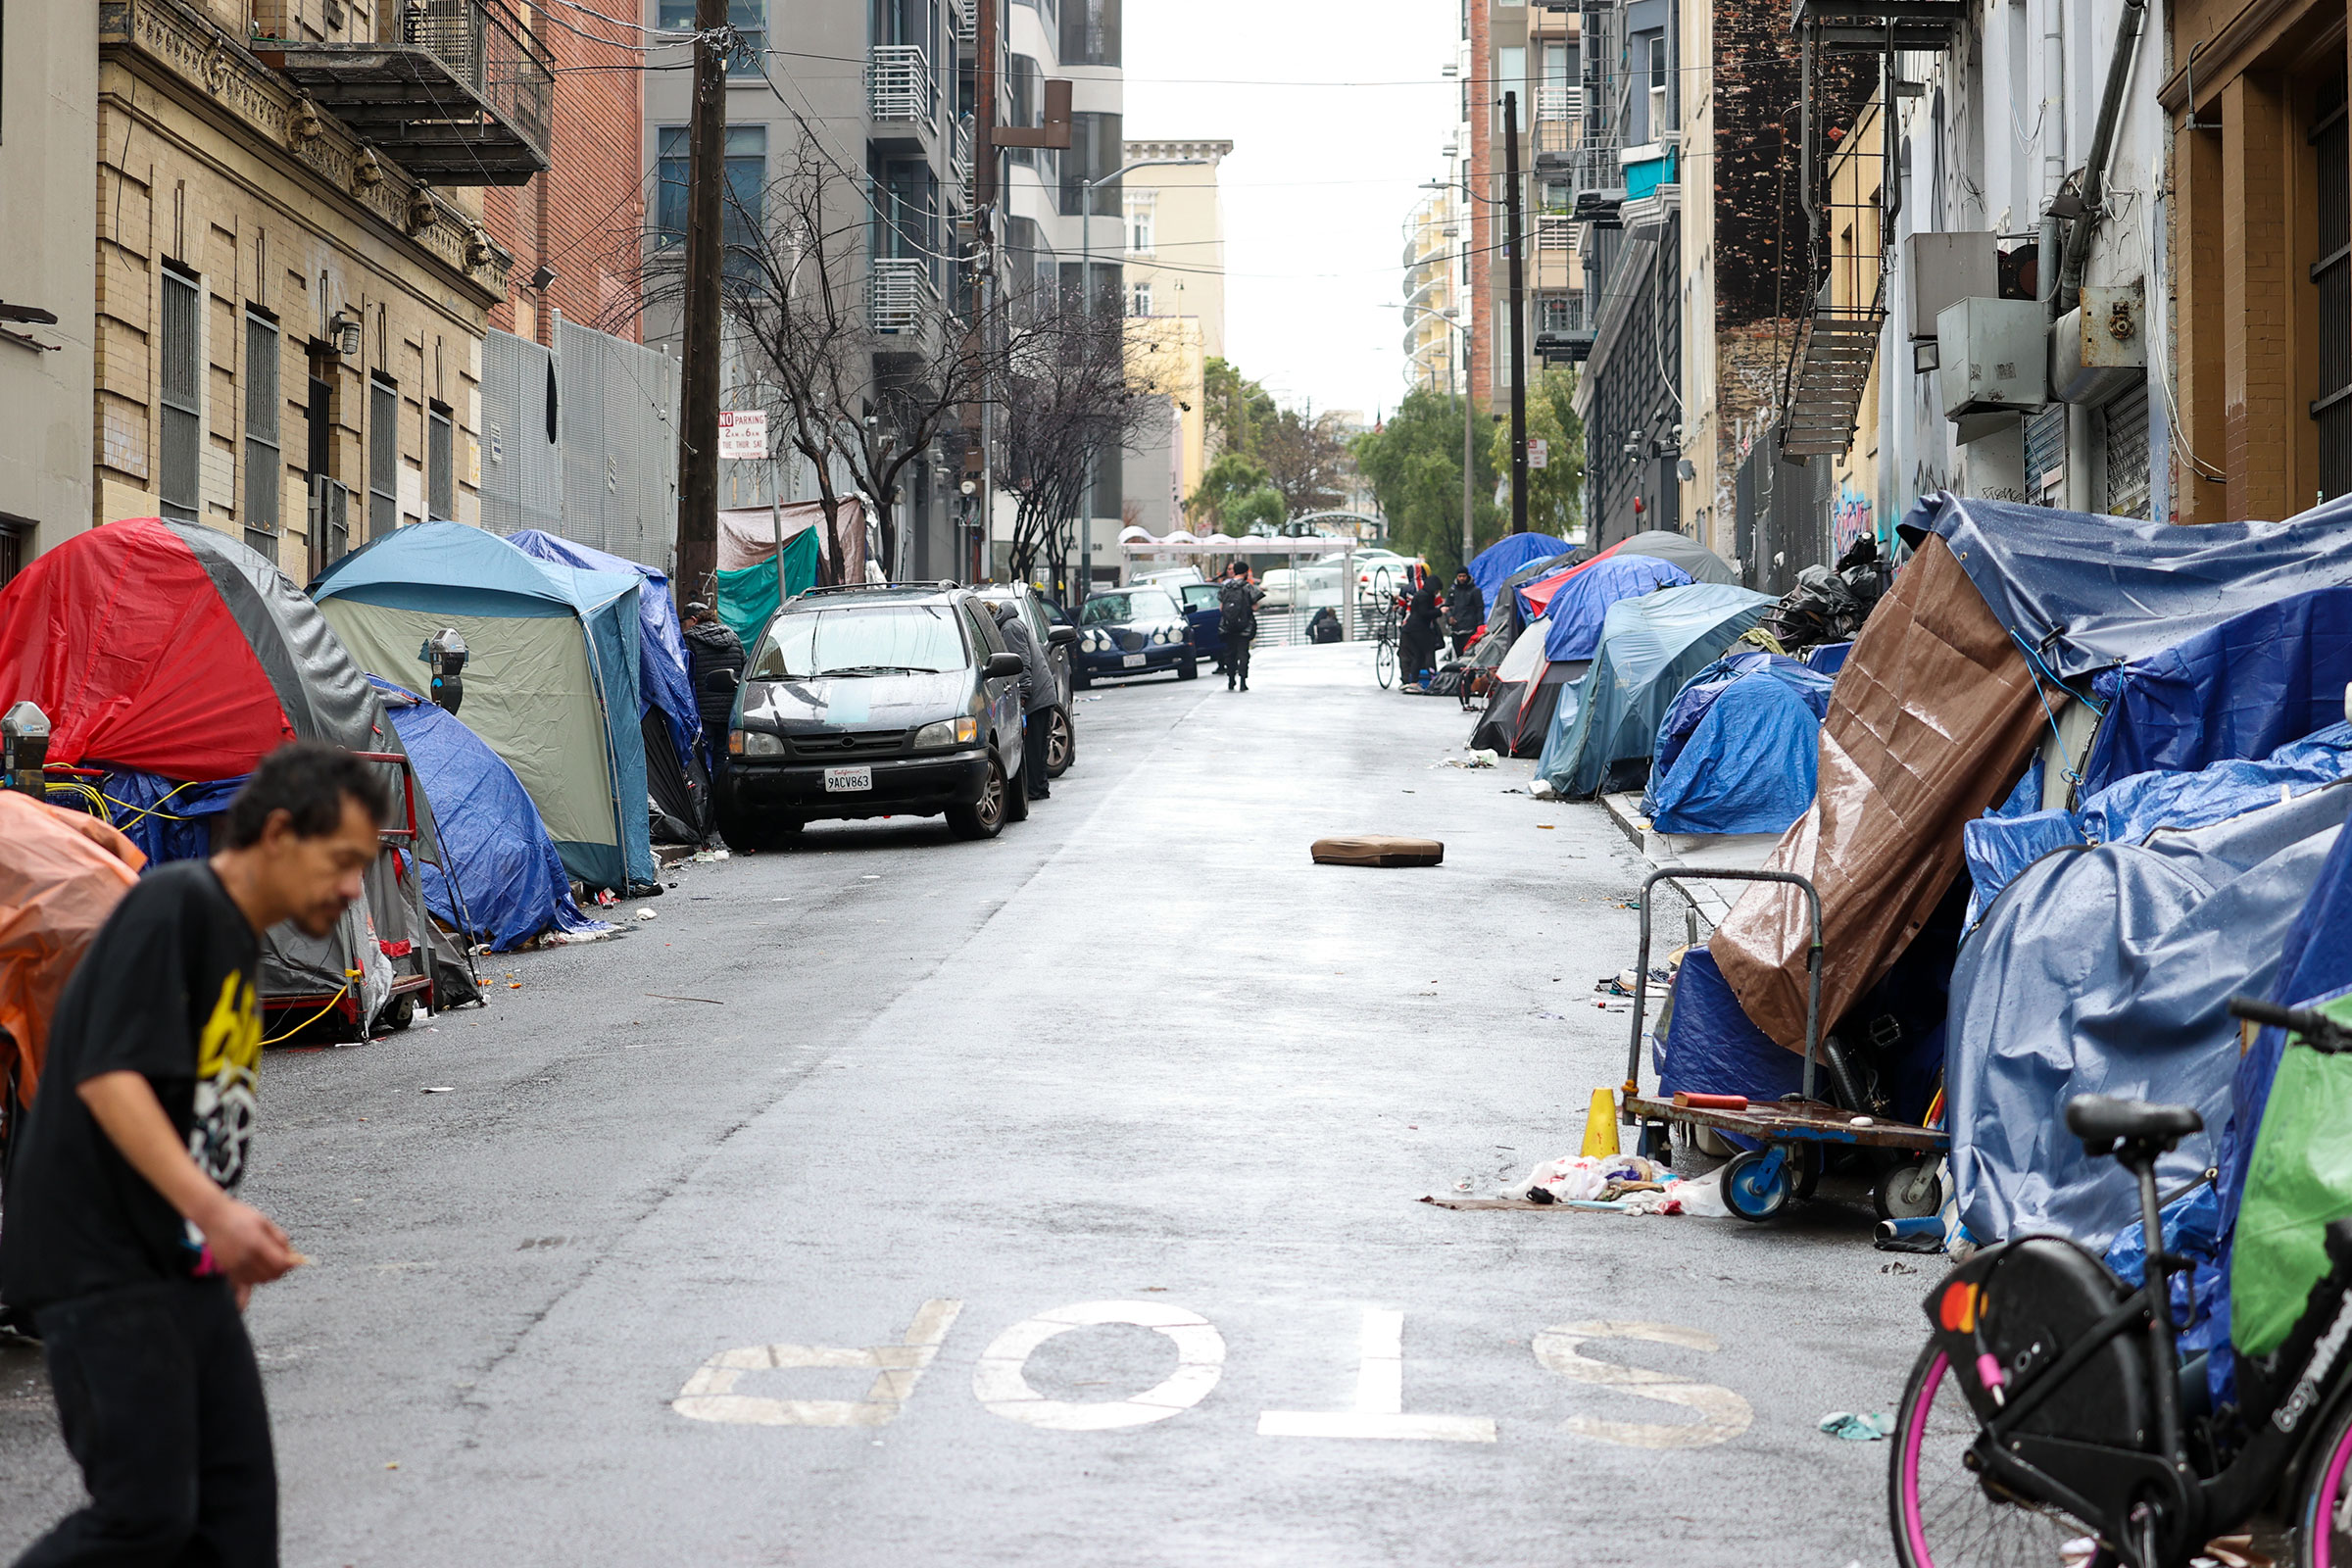 Tents line the sides of a San Fransisco street